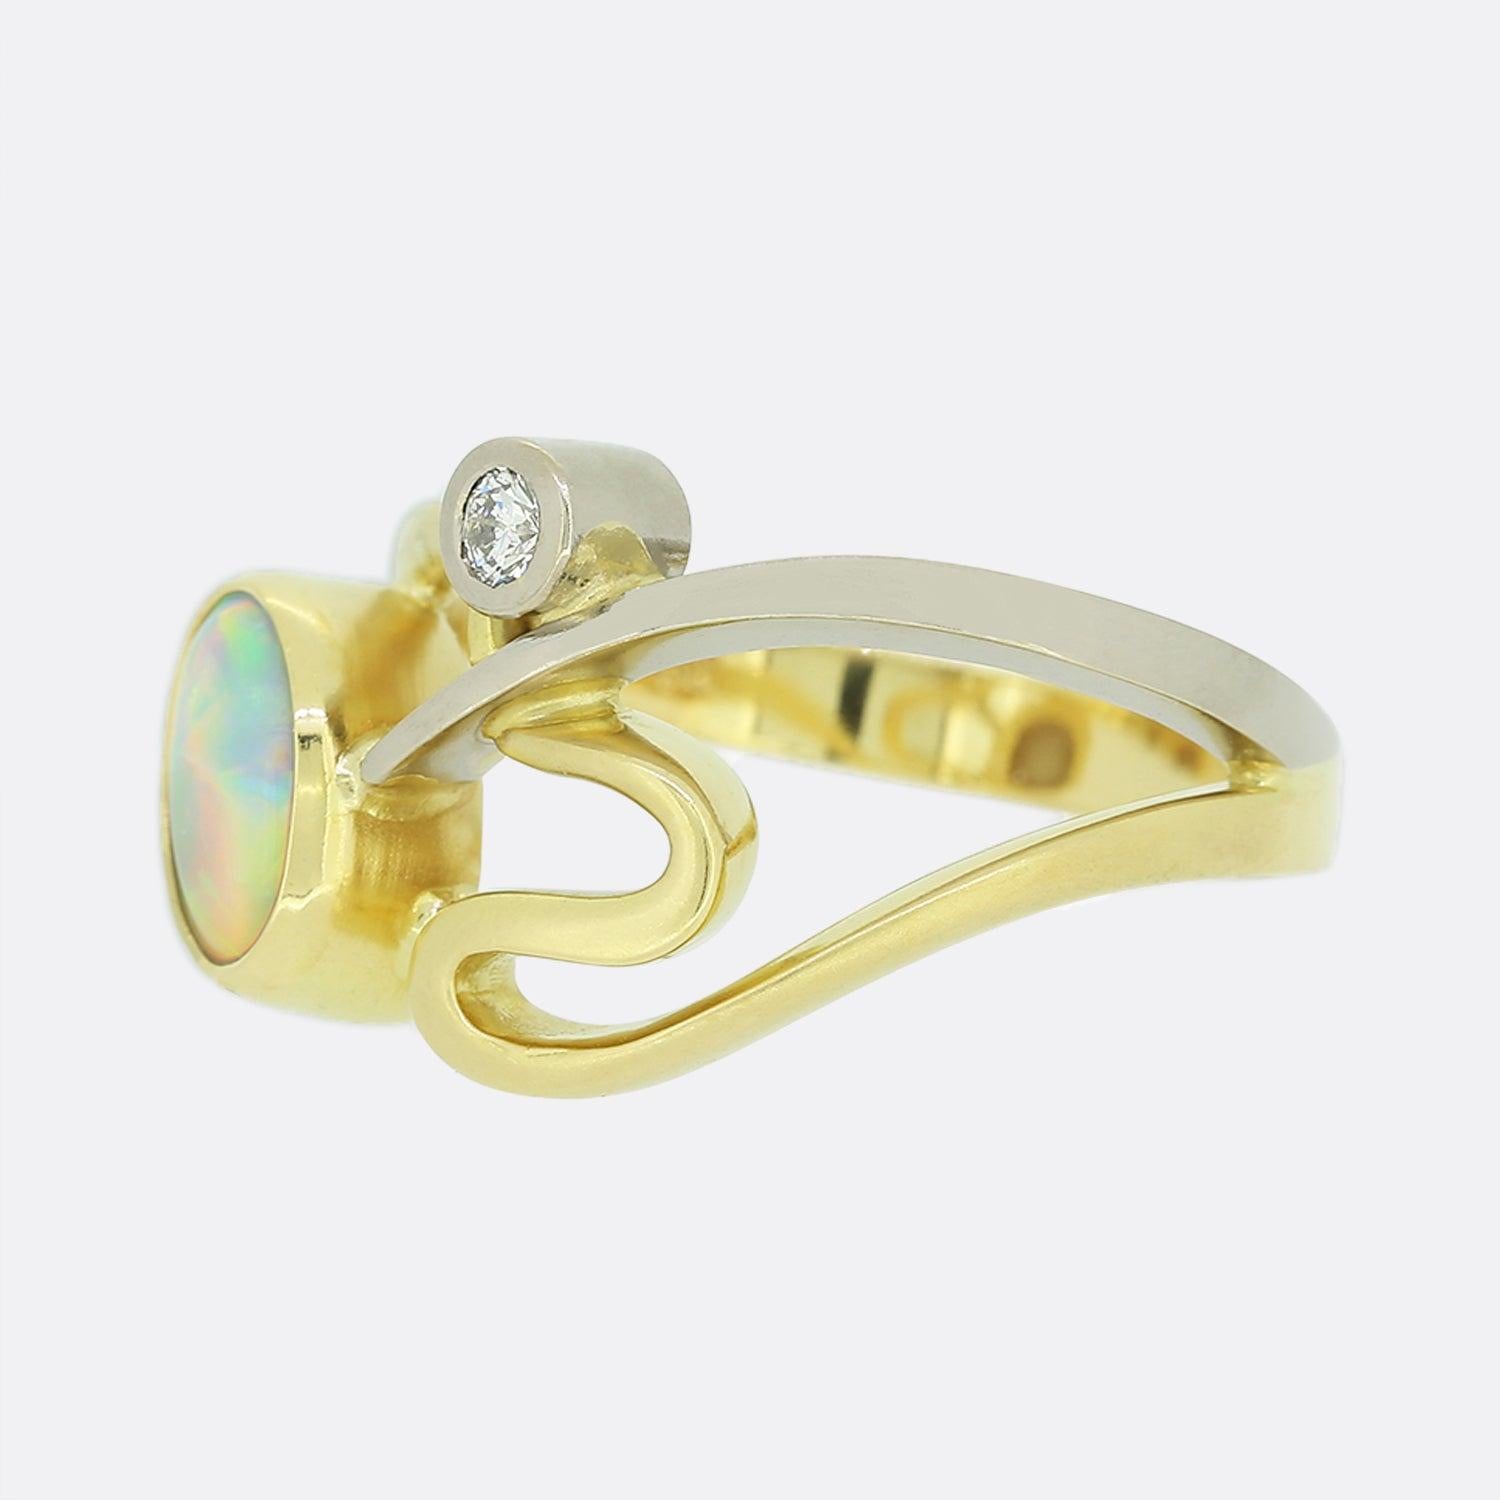 Here we have an 18ct yellow gold white opal and diamond abstract ring. The focal opal here is bezel set, oval cut and has a wondrous play of colour. This main stone is complemented by a single round cut natural diamond which sits just below upon a